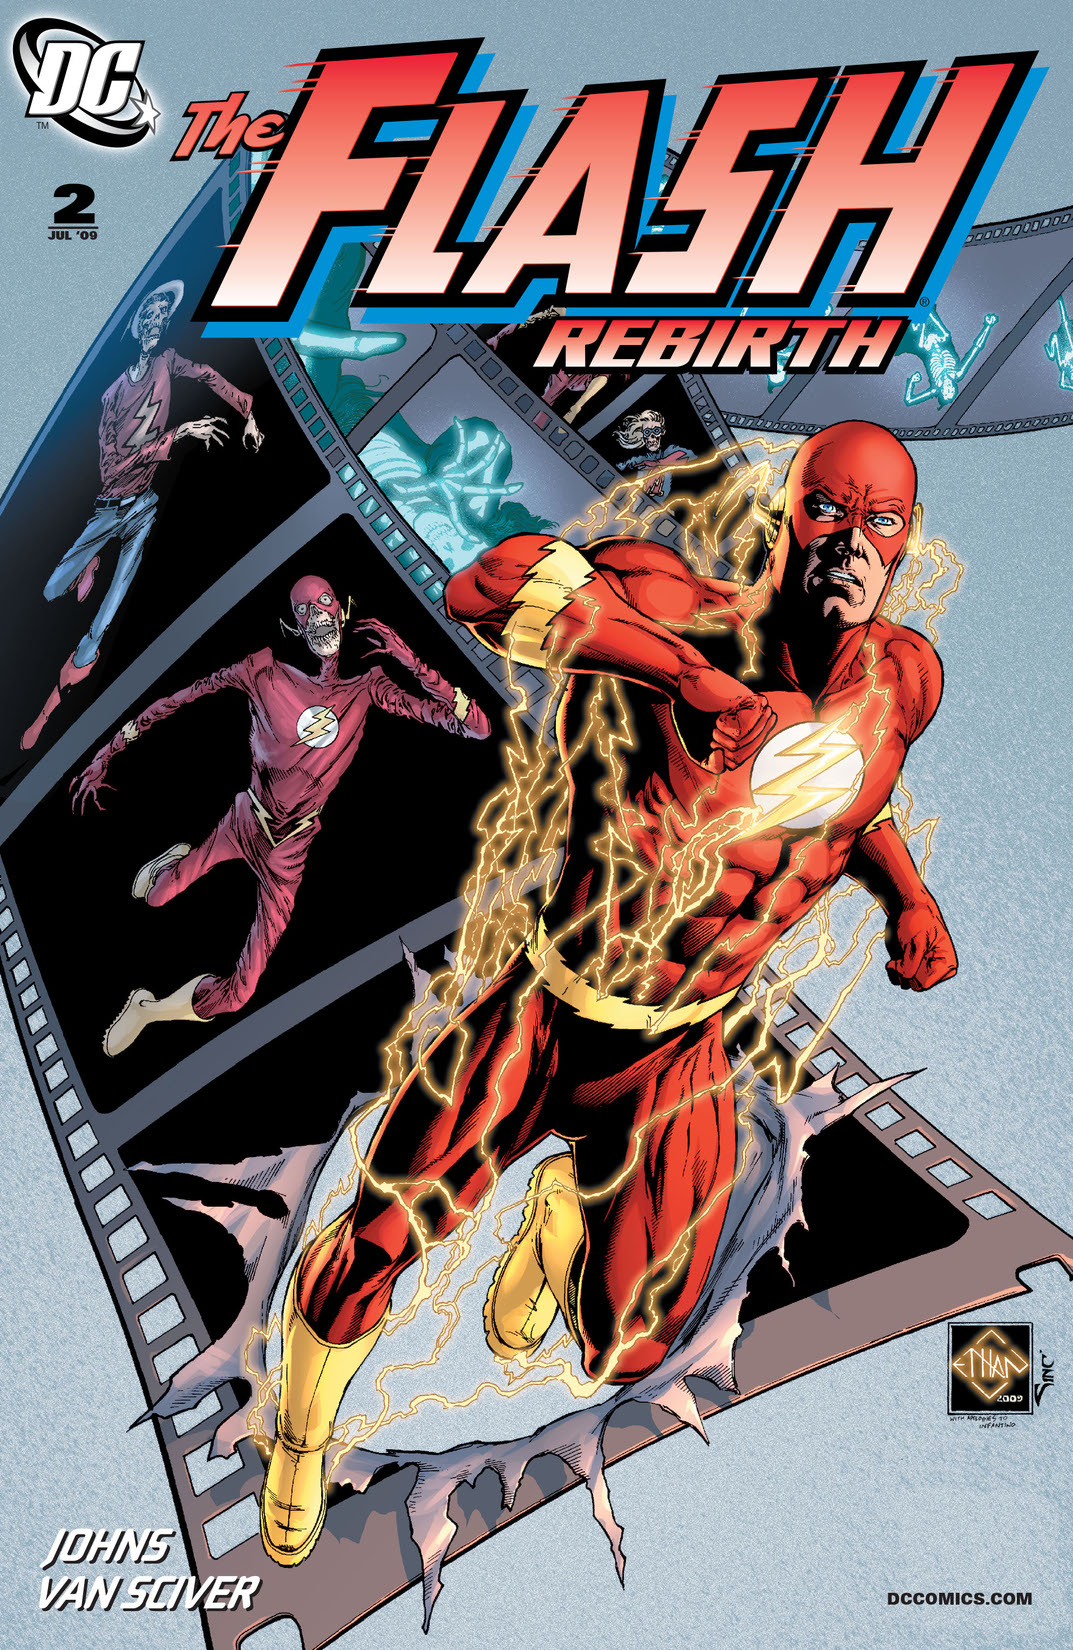 The Flash: Rebirth #2 preview images